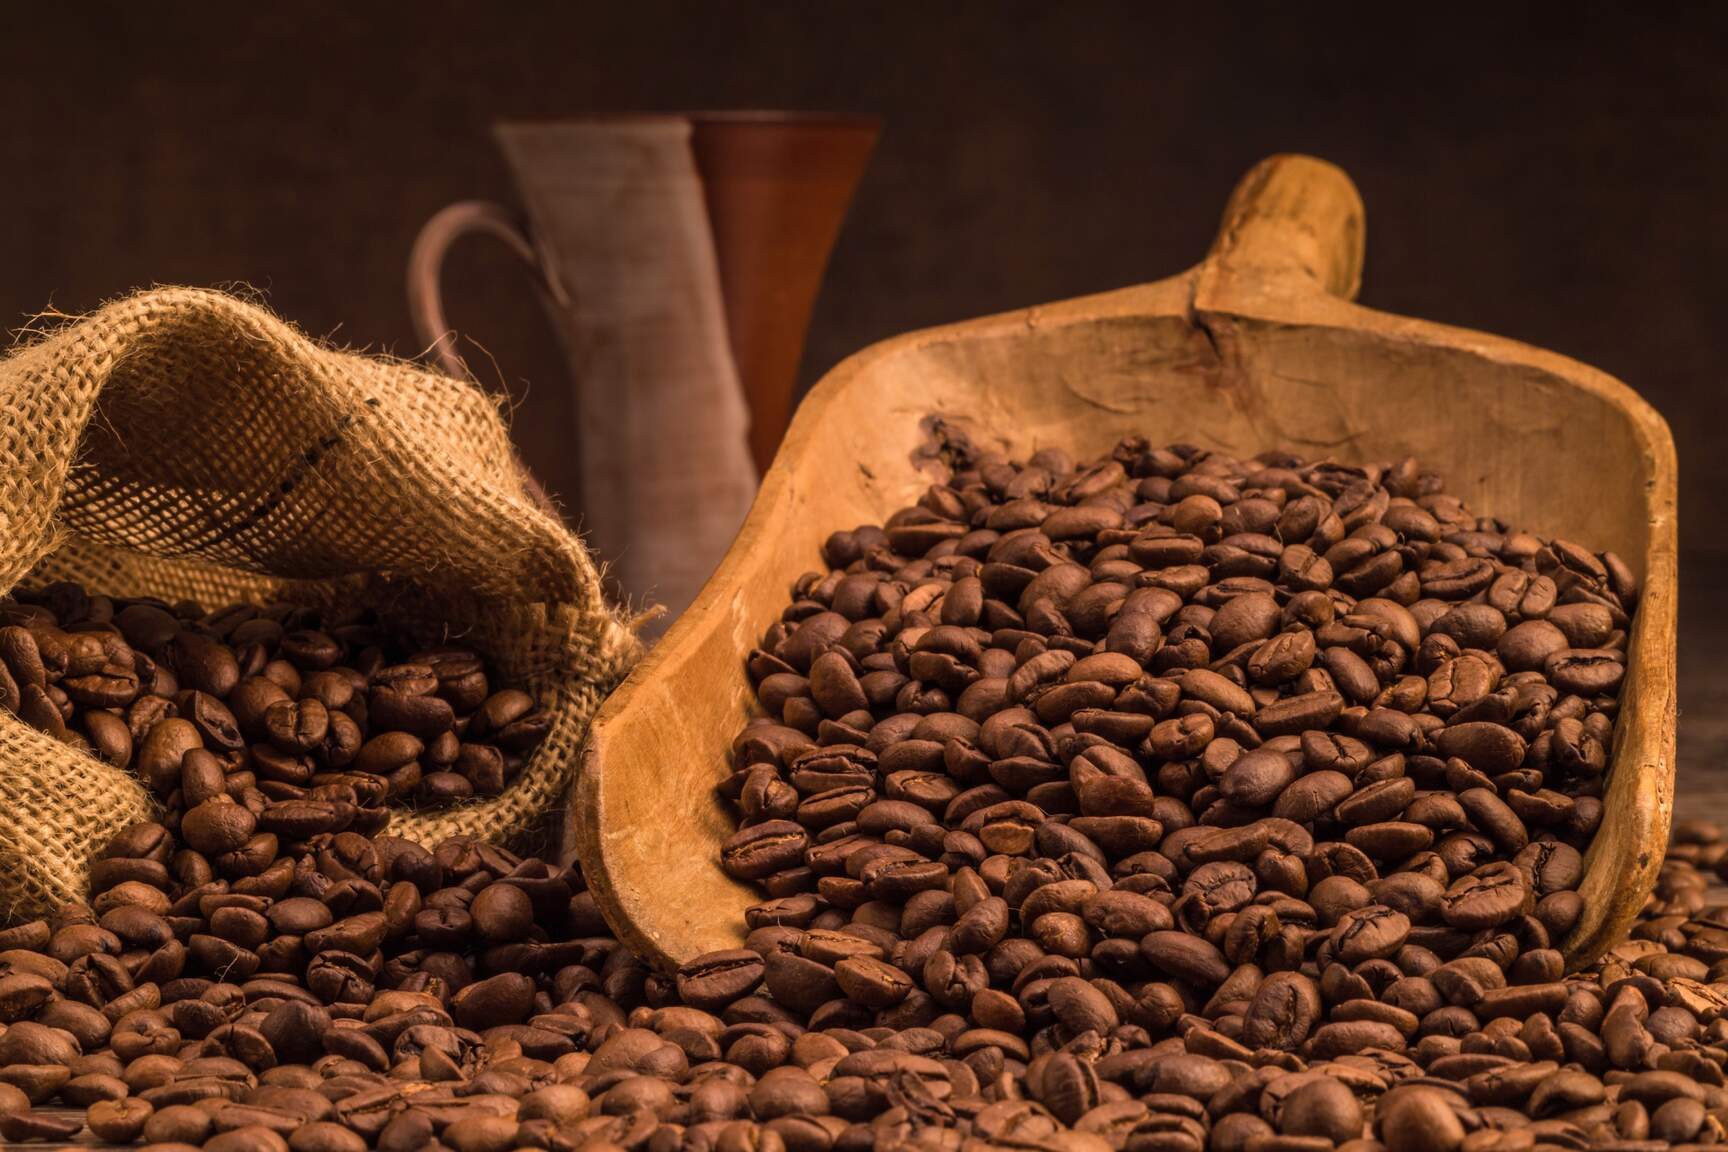 According to the Brazilian Coffee Industry Association (ABIC), Brazil is the largest coffee exporter in the world